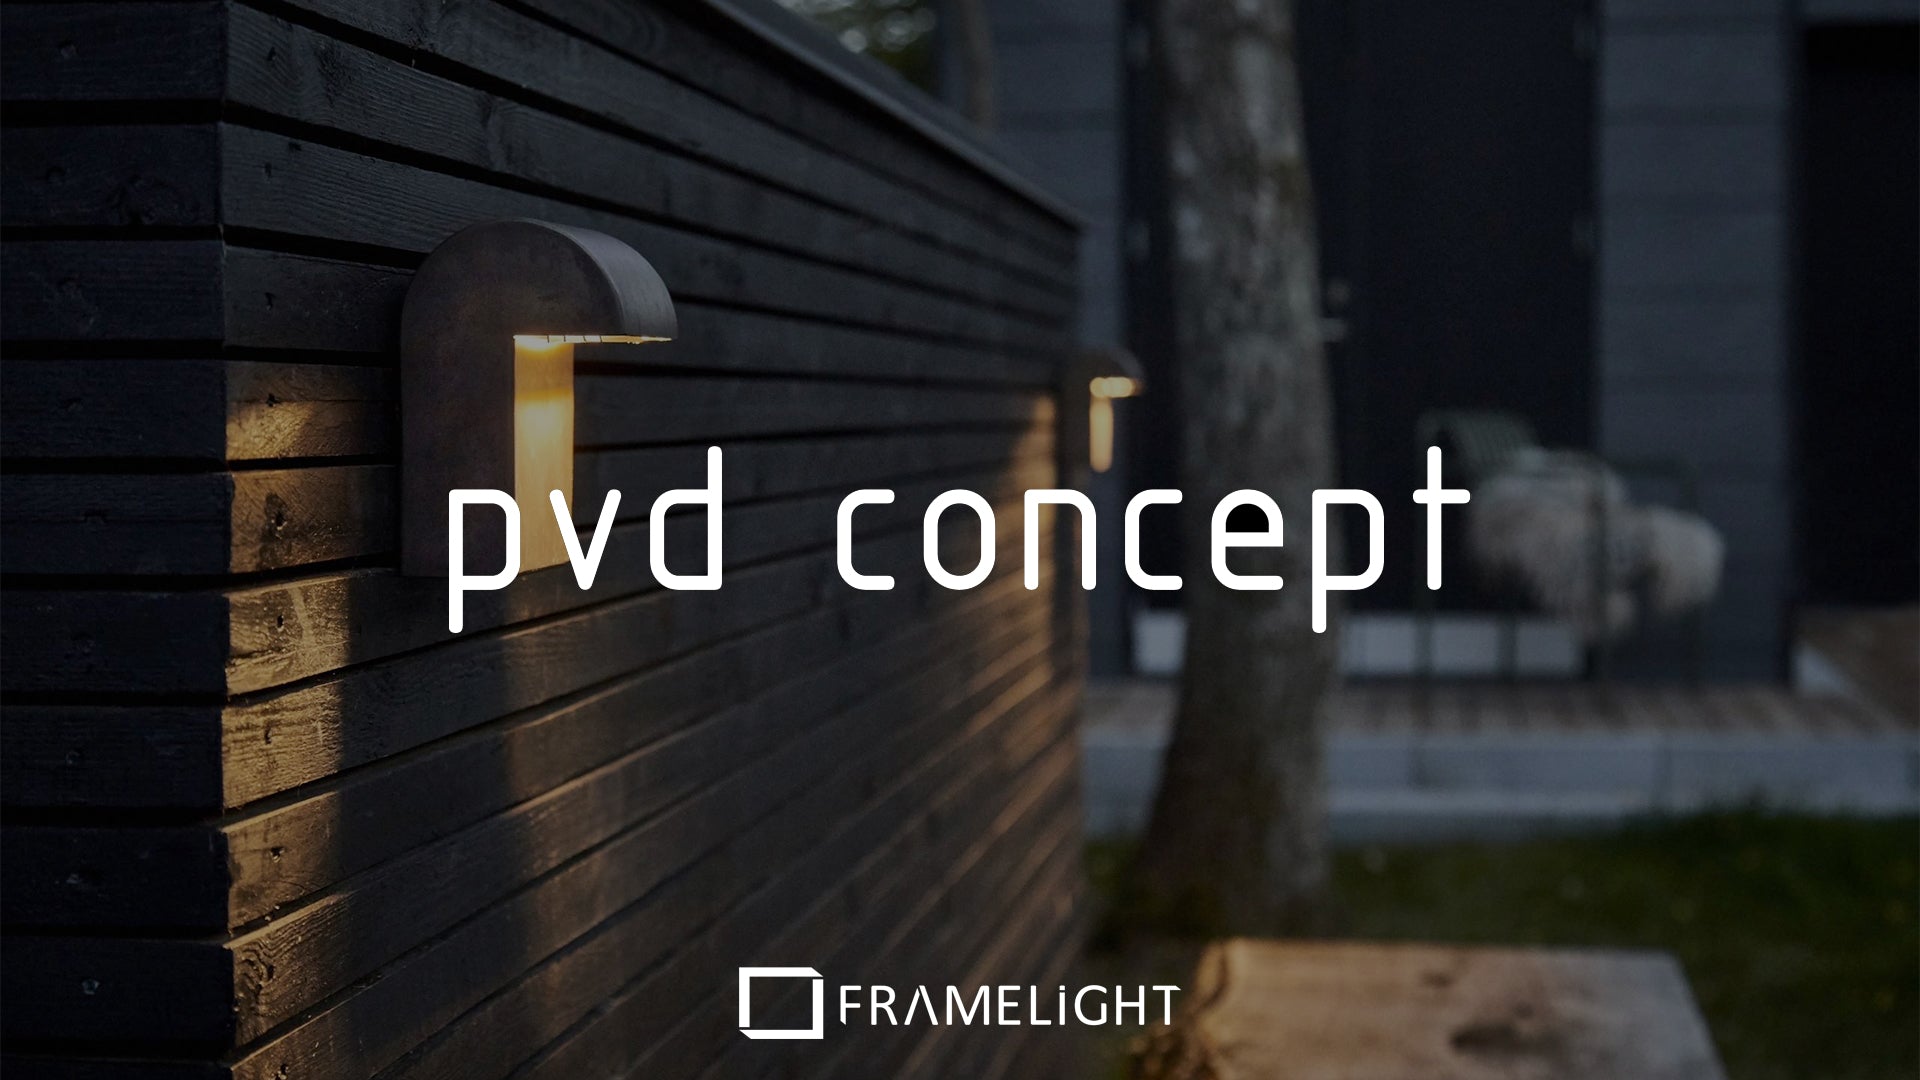 Our New Manufacturing Partner PVD concept